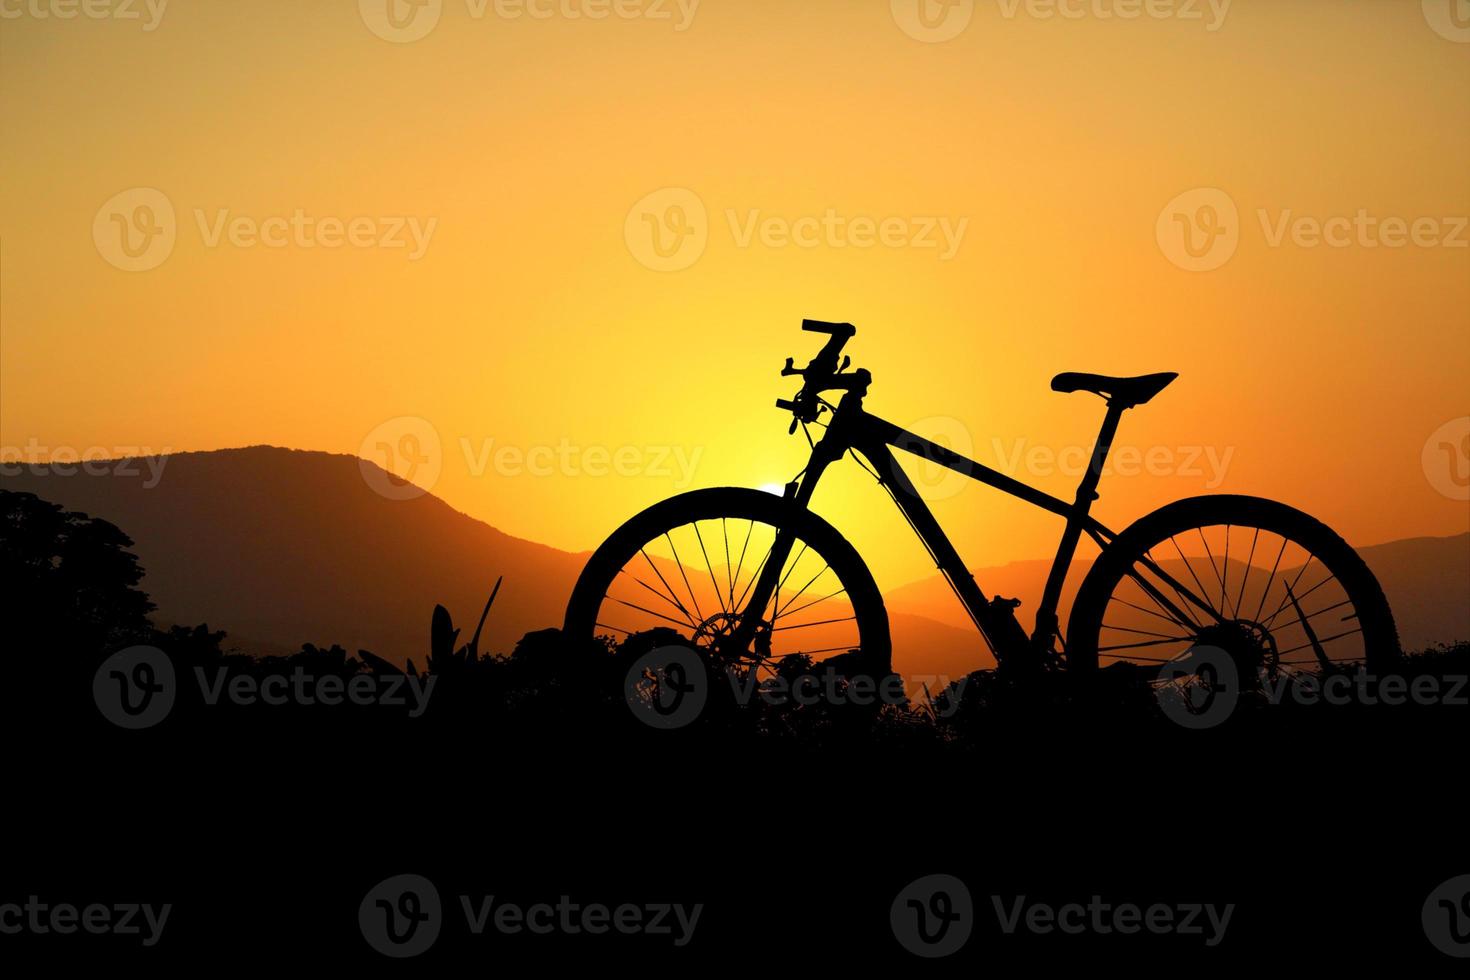 Mountain bike silhouette in a beautiful view. cycling and adventure concept photo